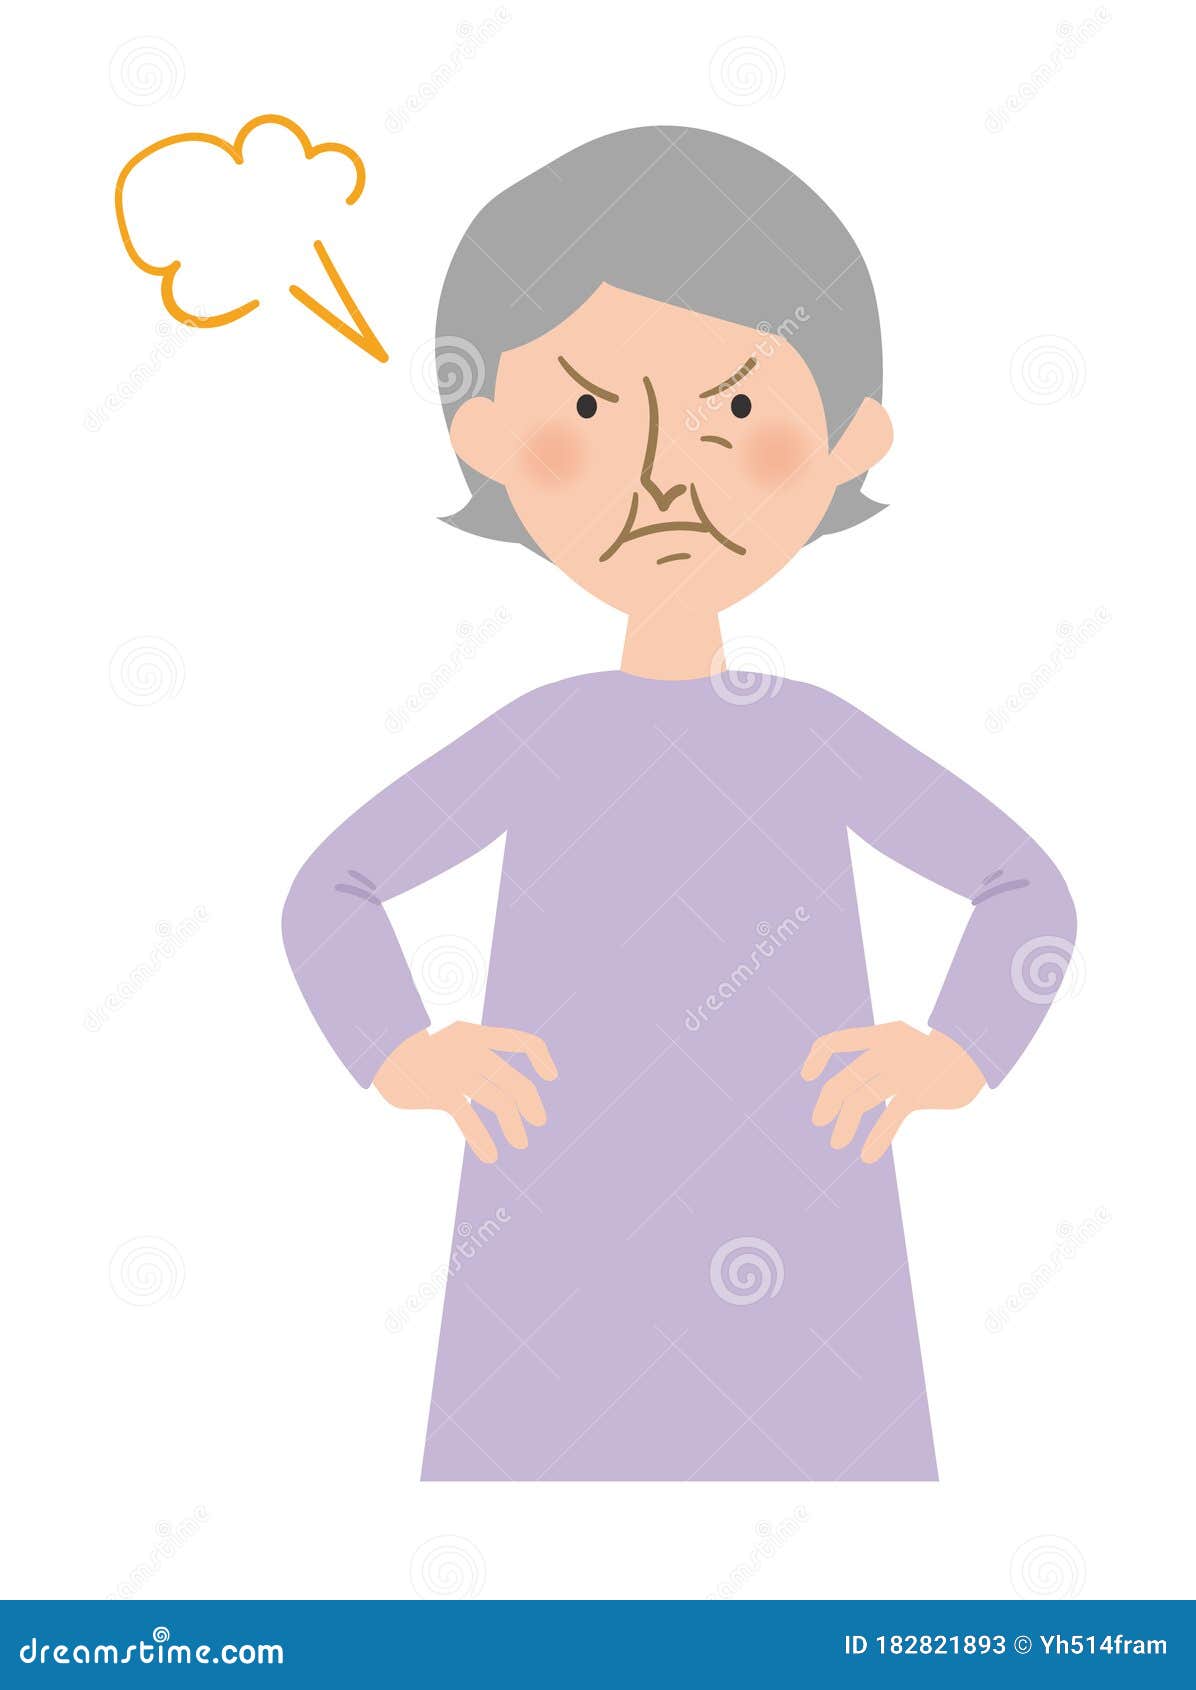 Grandma of Vector Illustrations Angry with Blood Up To the Head Stock ...